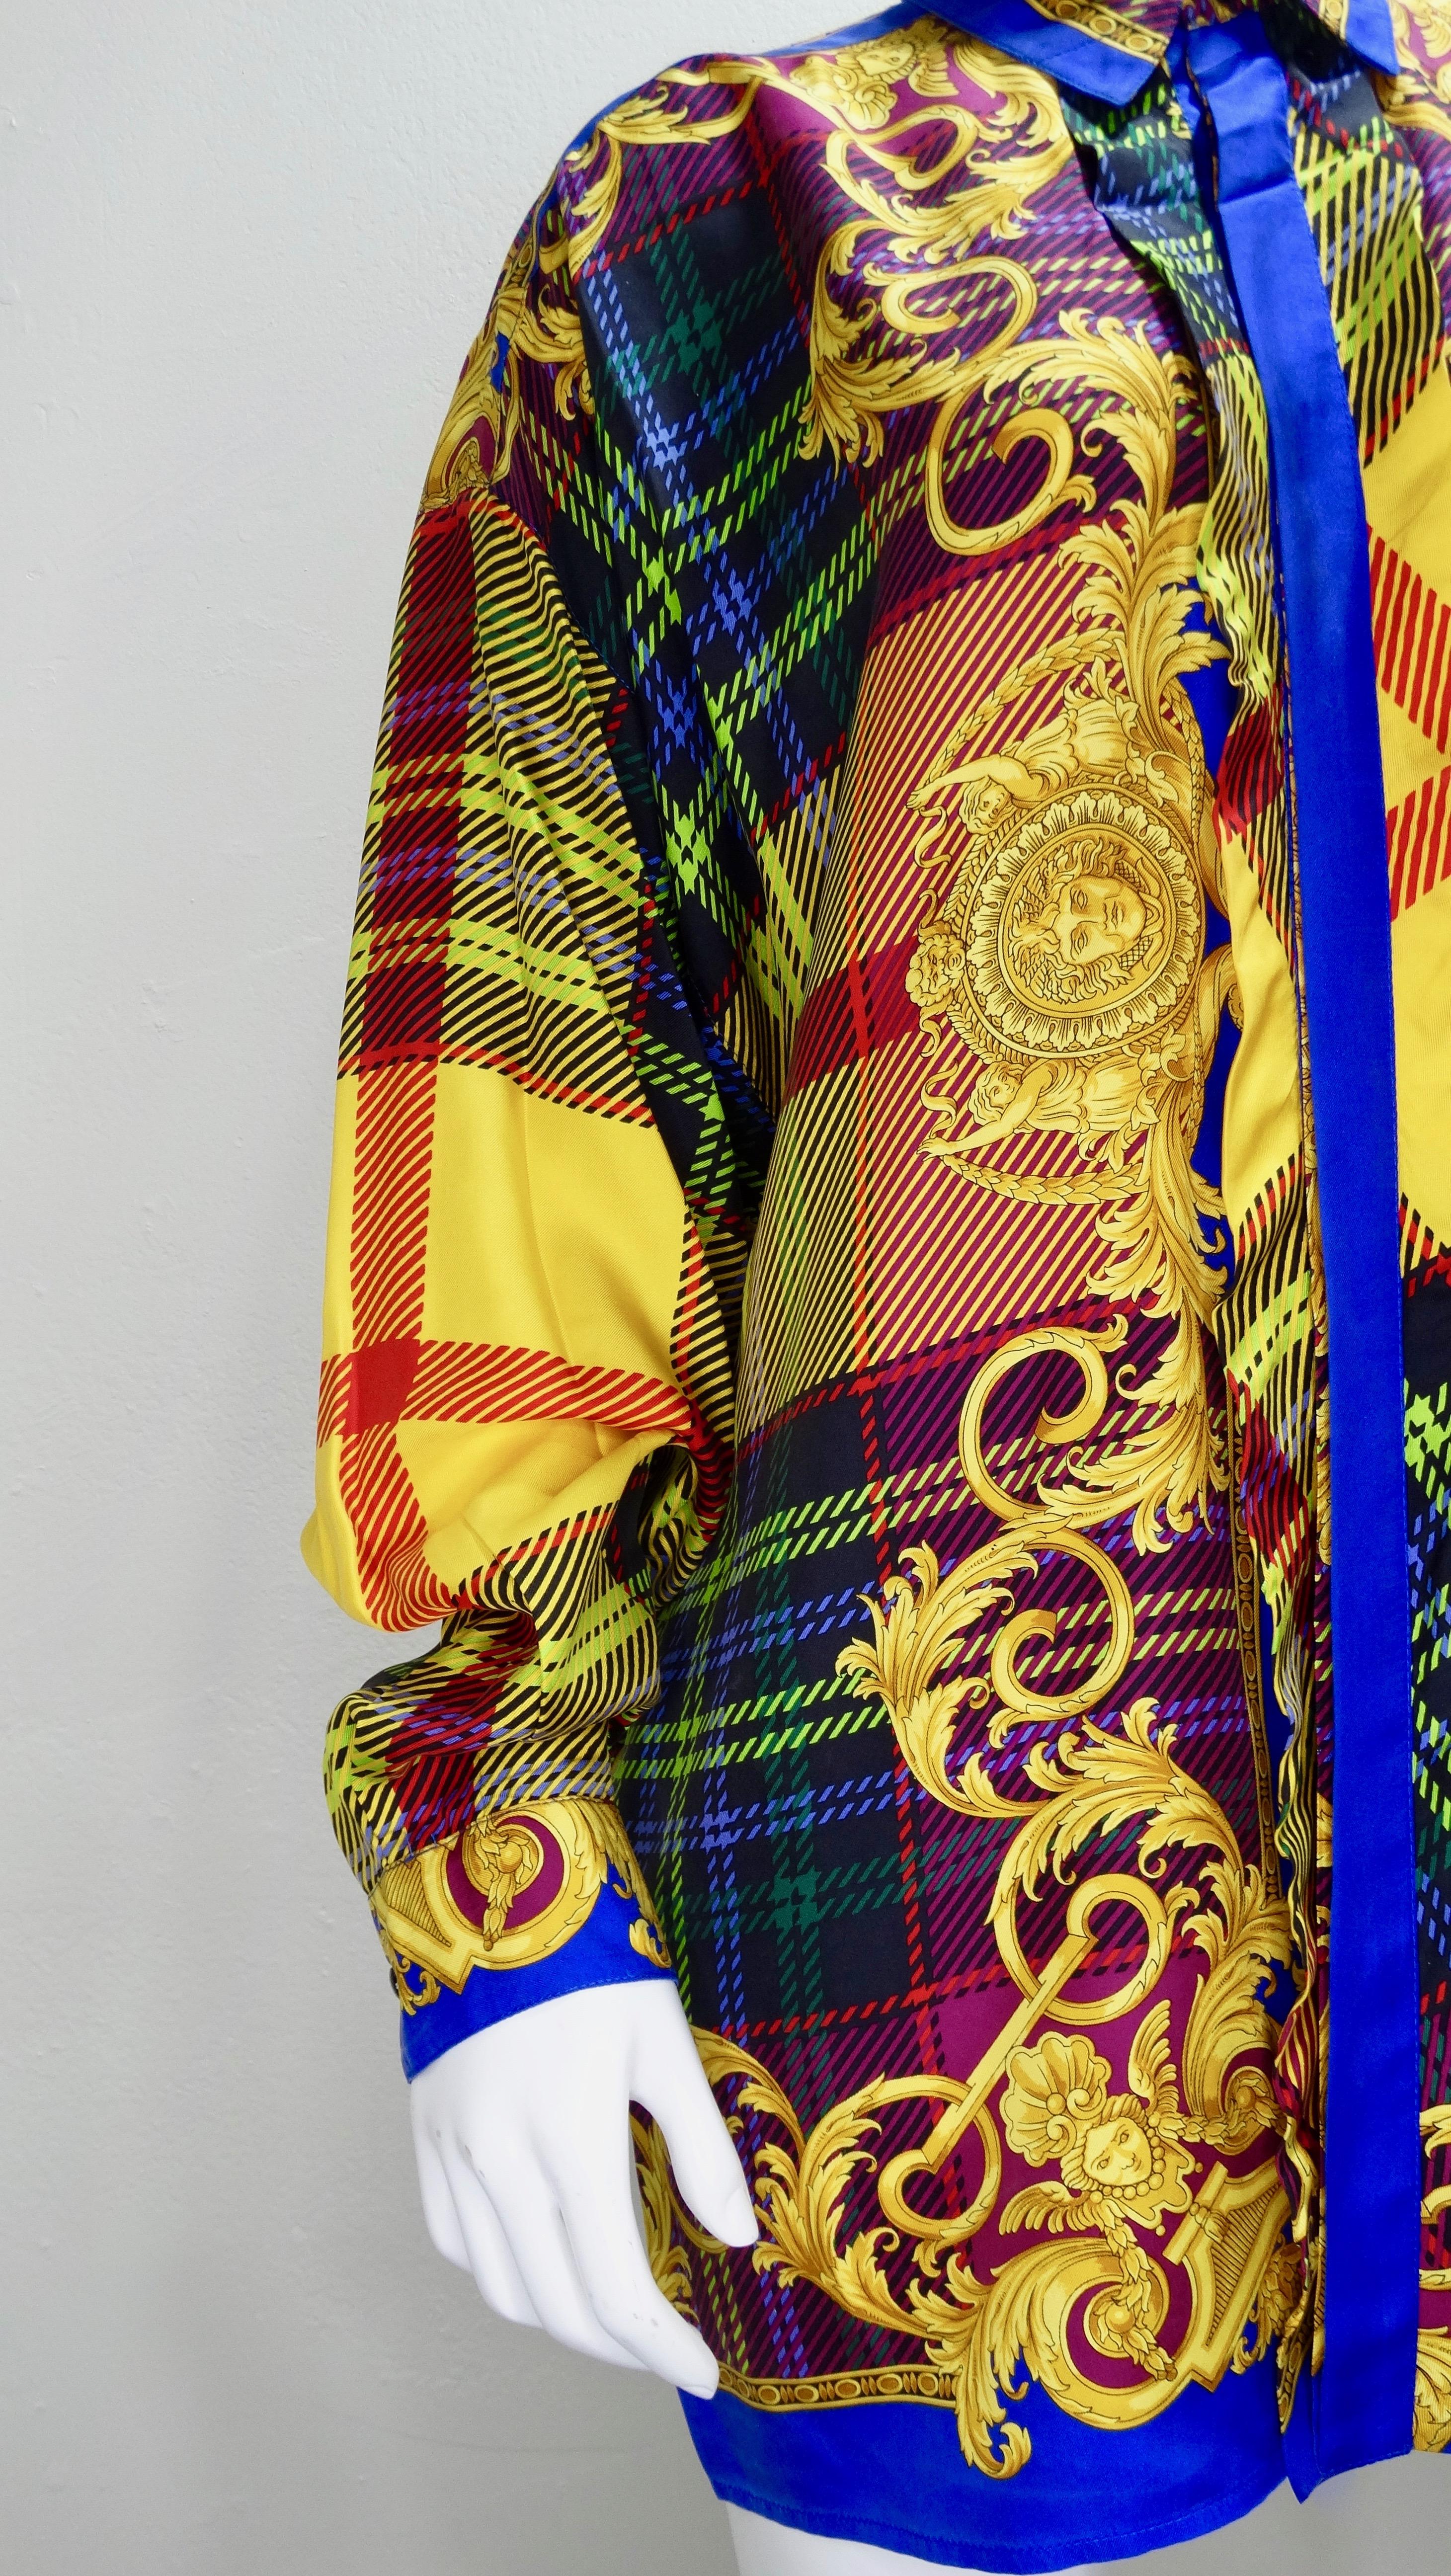 Gianni Versace 1990s, this colorful Silk button down shirt features a layered multi-colored plaid print mixed with Versace's signature Baroque designs and Medusa heads. Includes a hidden button closure down front, classic collar and faceted buttons